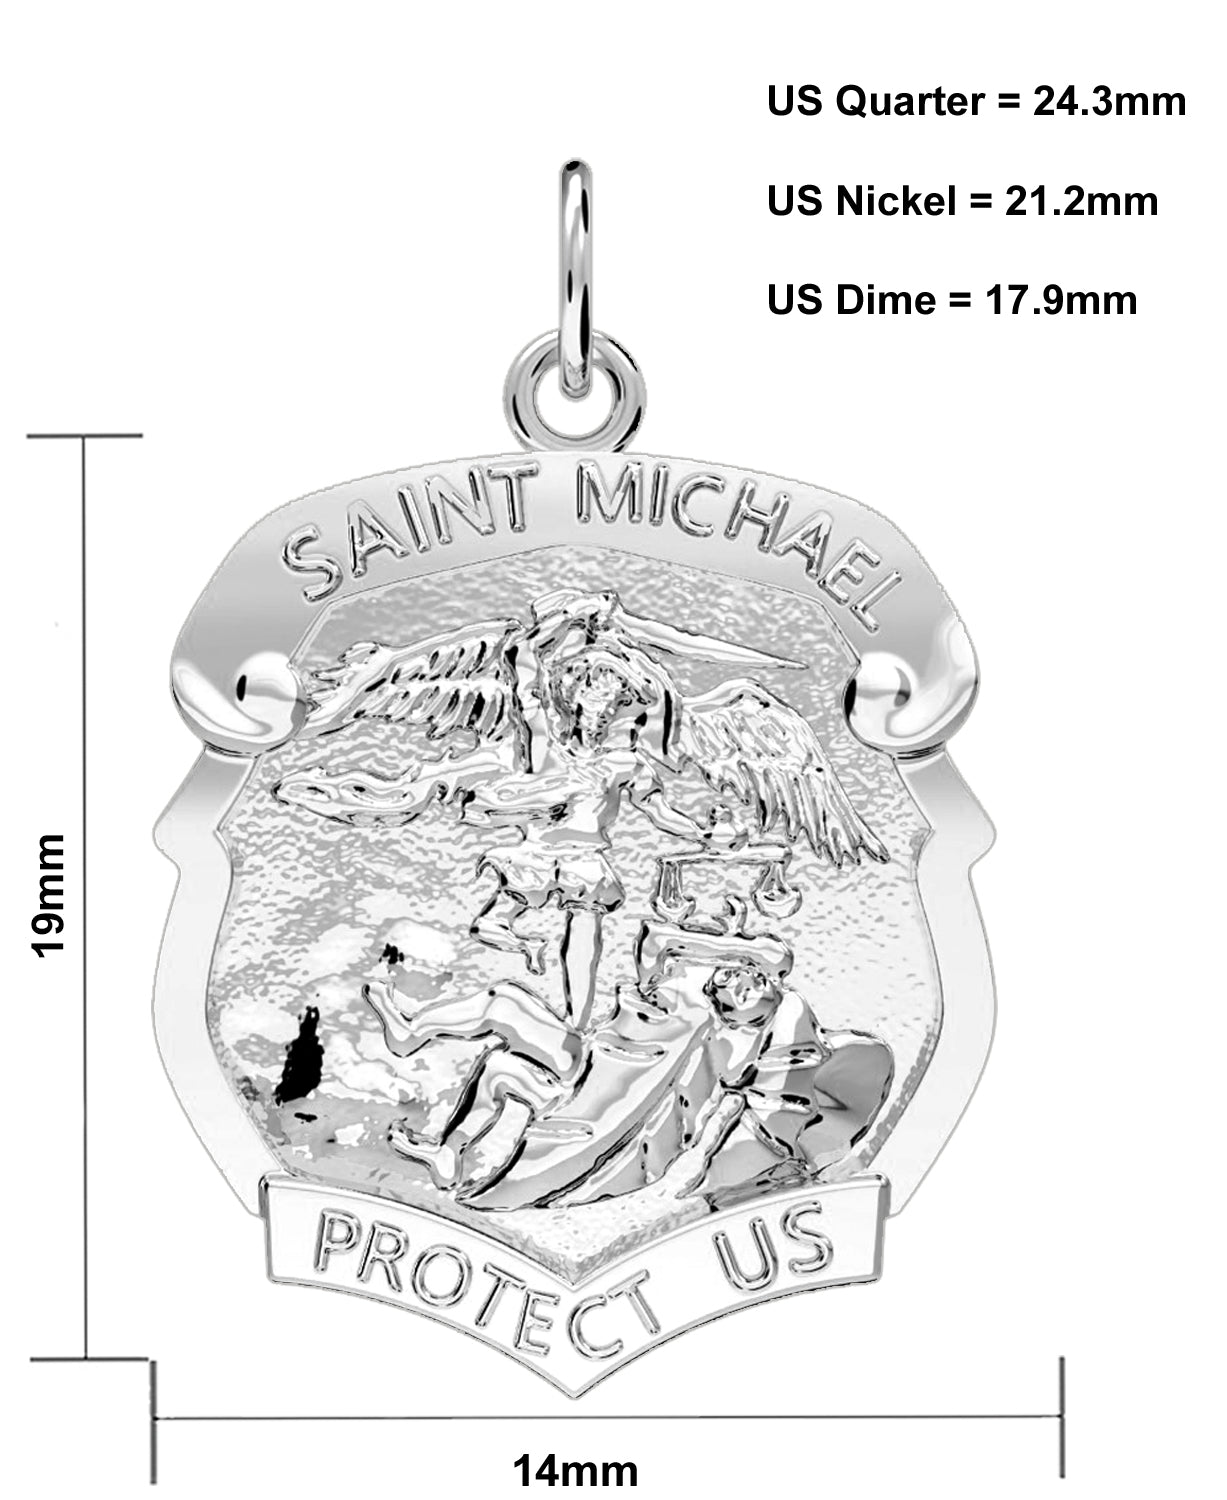 Ladies 925 Sterling Silver Saint Michael High Polished Shield Badge Pendant Necklace, 19mm - US Jewels